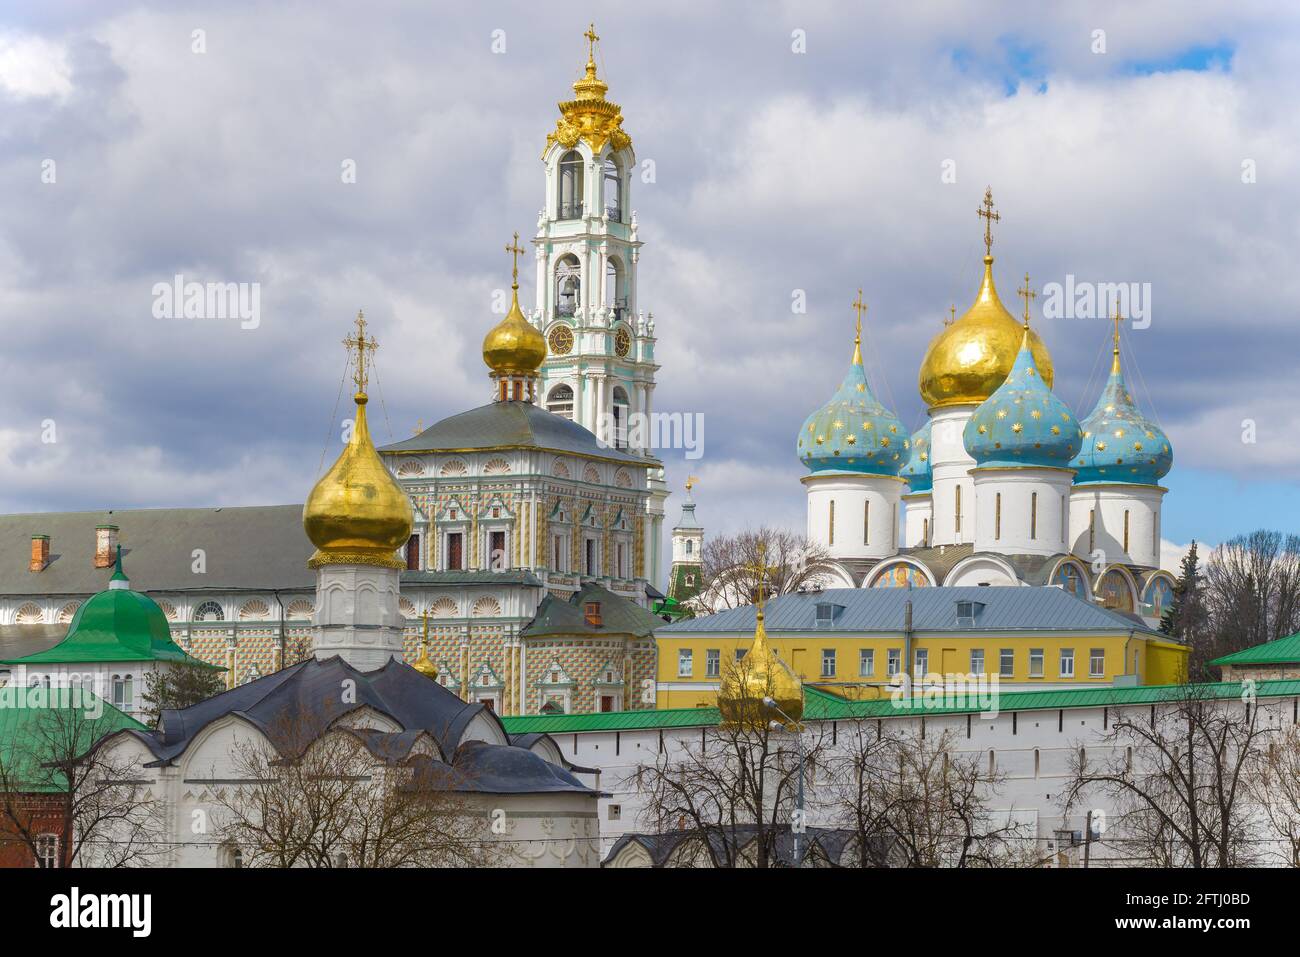 View of the domes of the Holy Trinity Lavra of St. Sergius on a cloudy April day. Sergiev Posad. Moscow region, Russia Stock Photo